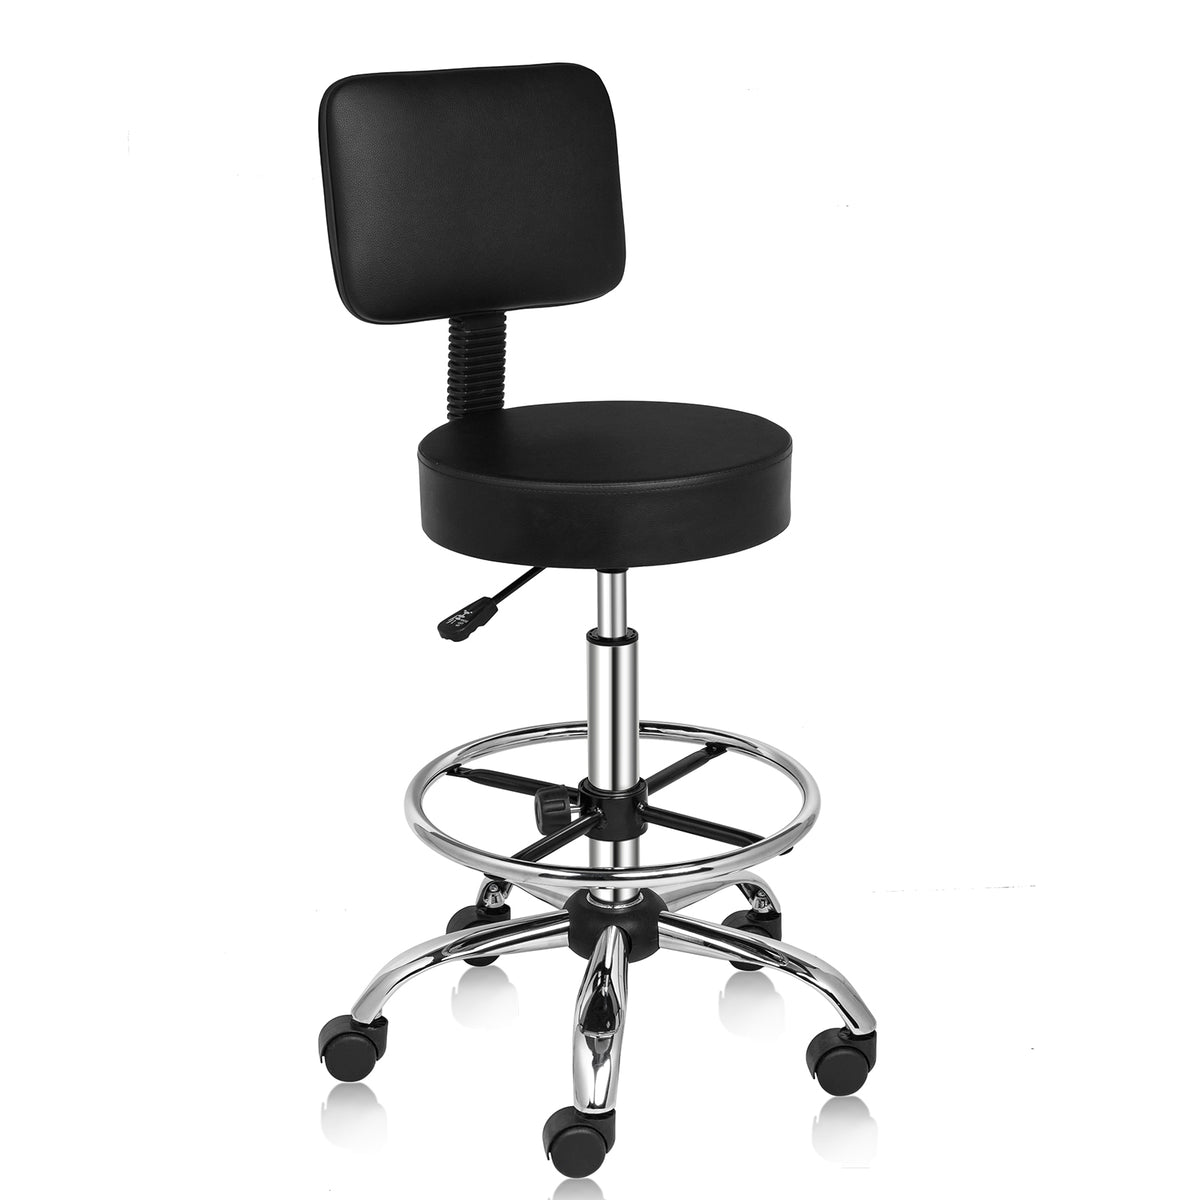 OmySalon Adjustable Rolling Saddle Stool with with Back Support on Wheels Black